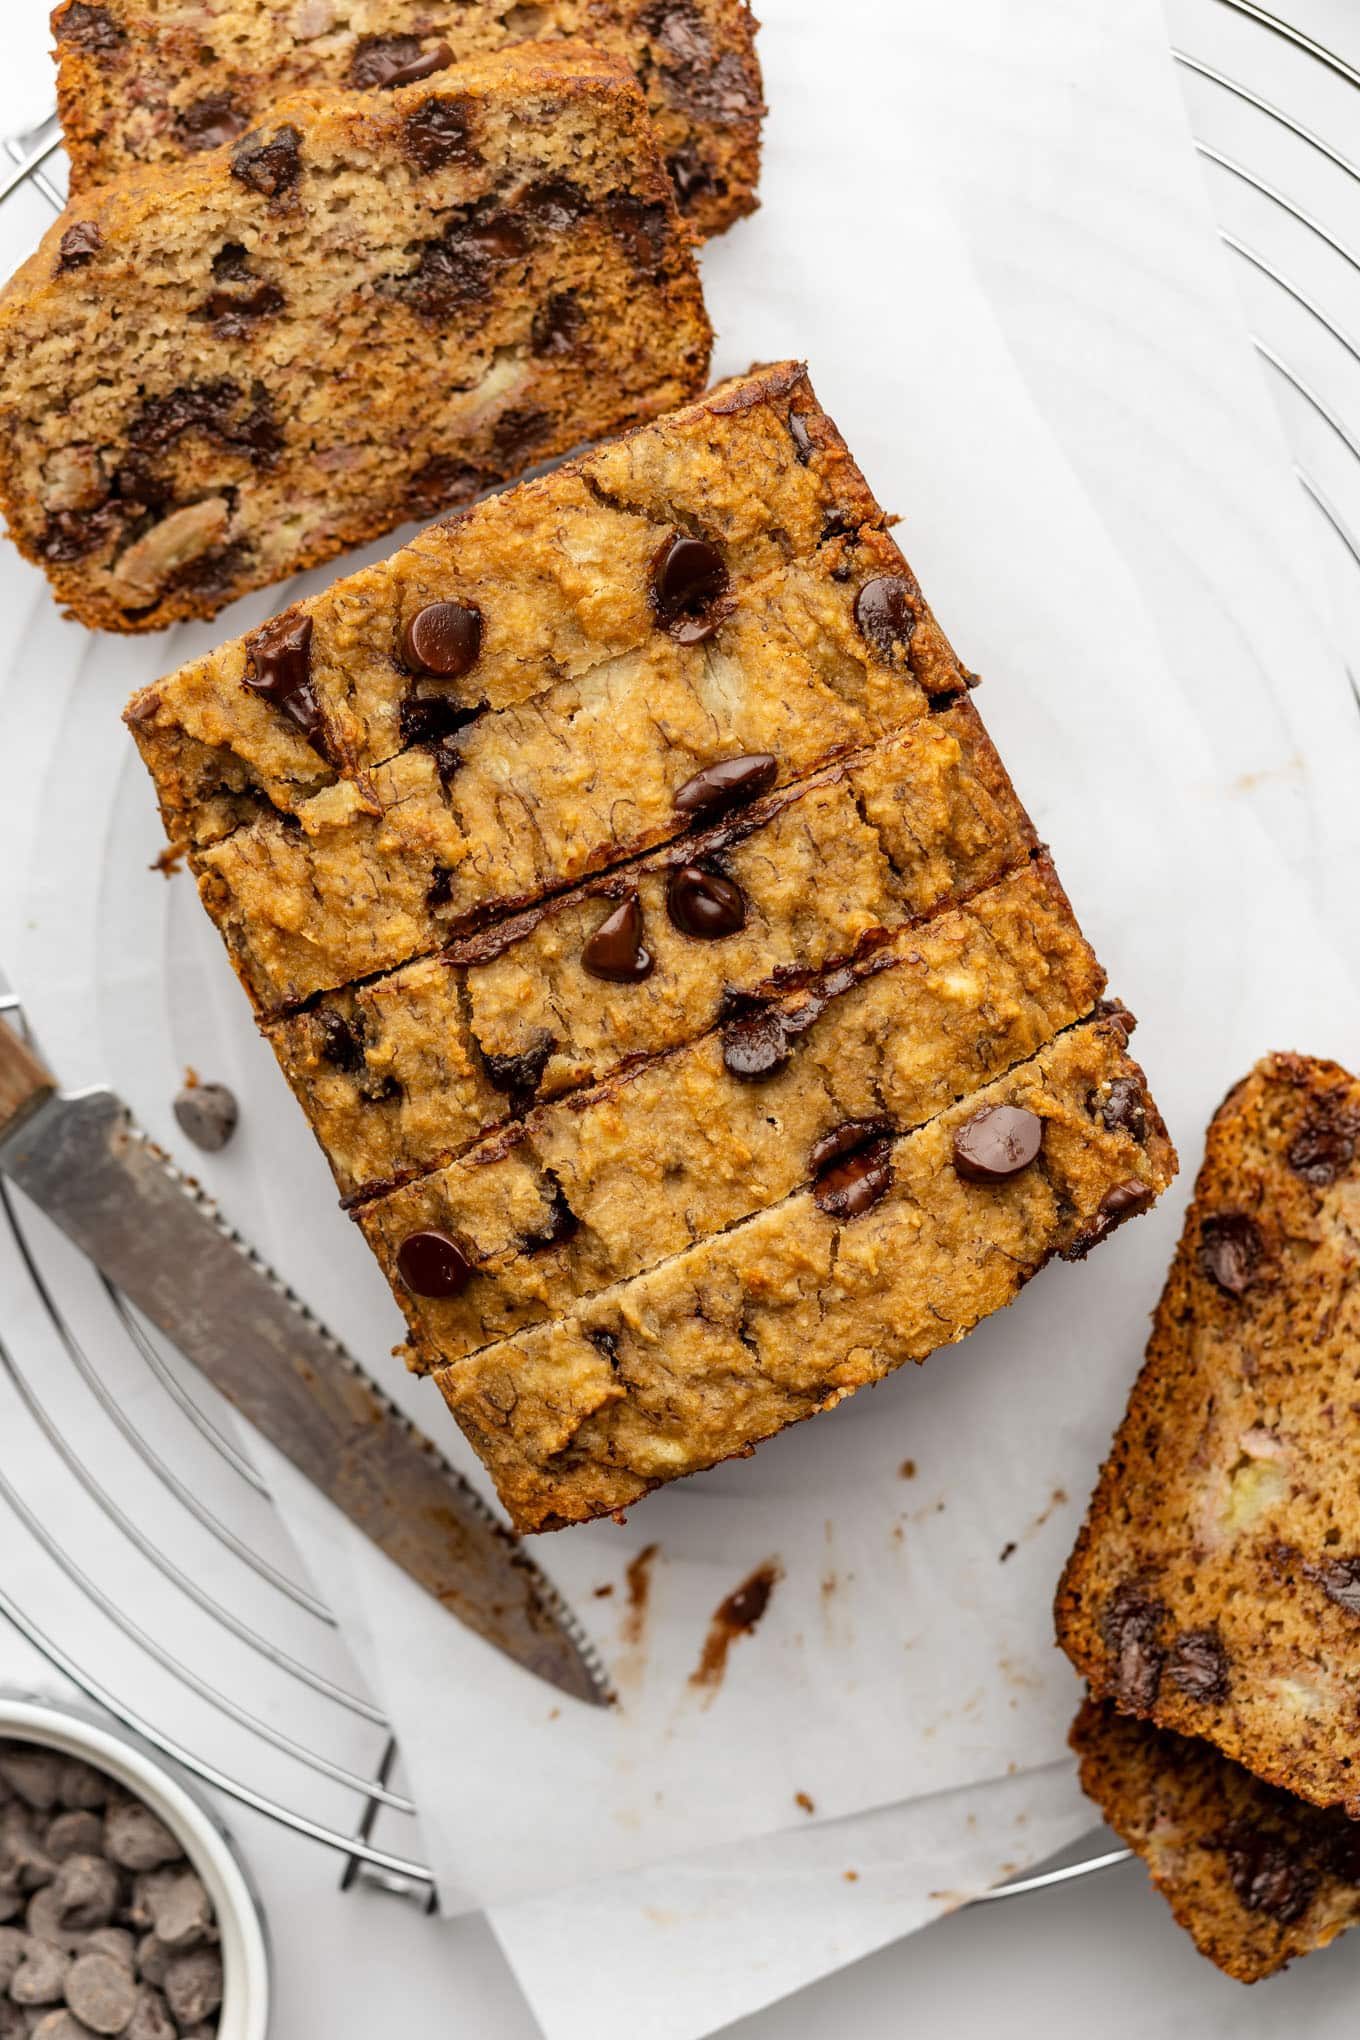 Grain Free Chocolate Chip Banana Bread - The Whole Cook